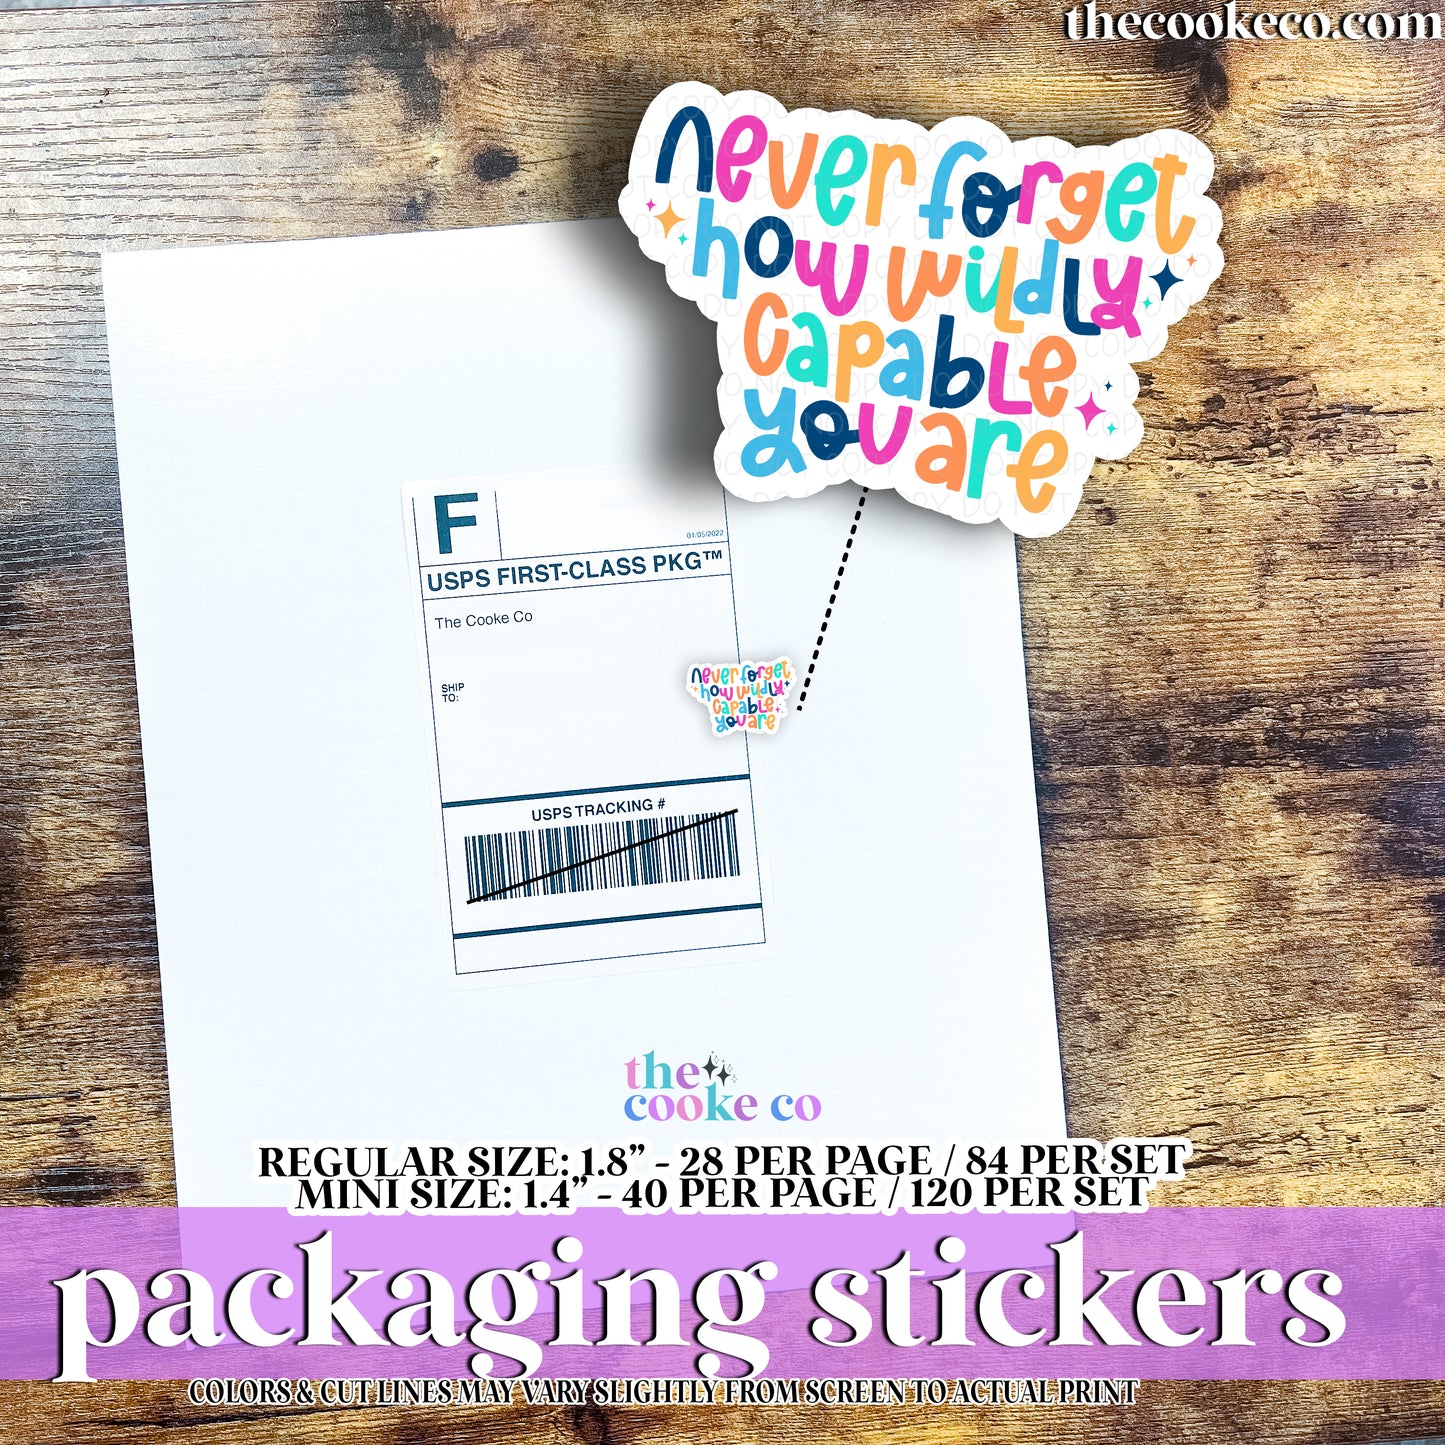 Packaging Stickers | #C0935 - NEVER FORGET HOW WILDLY CAPABLE YOU ARE